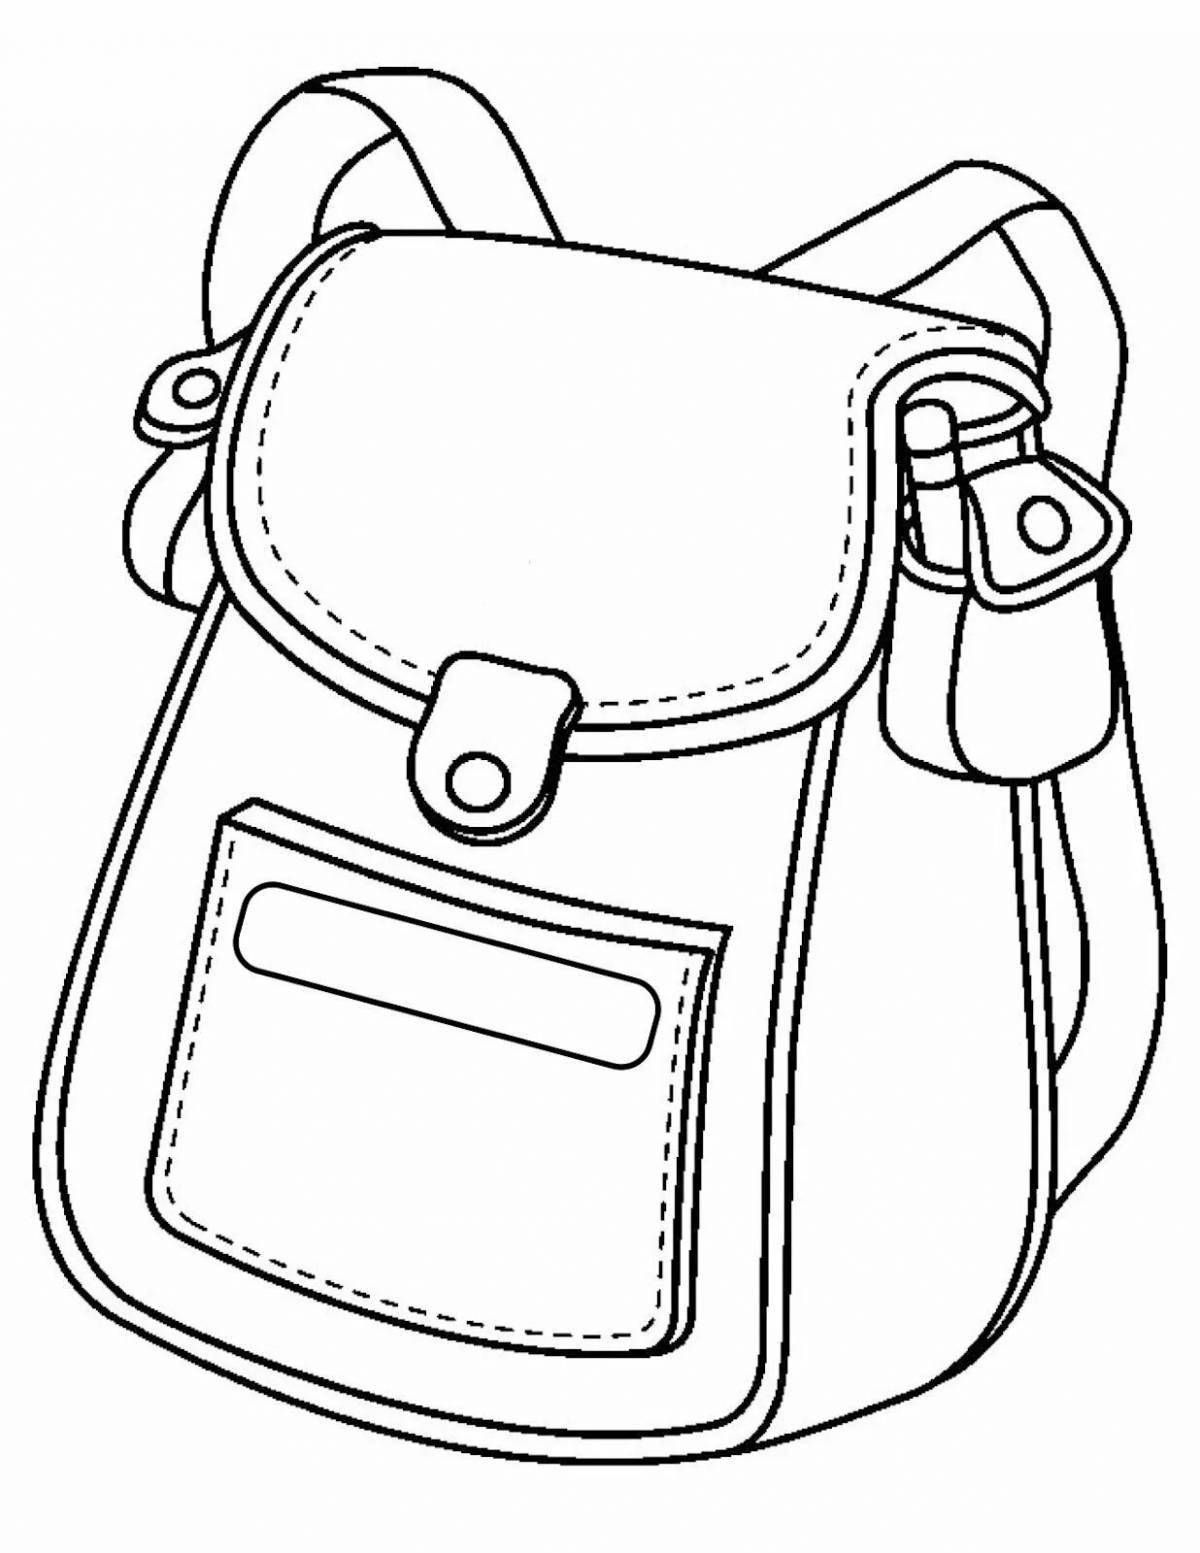 Amazing backpack coloring page